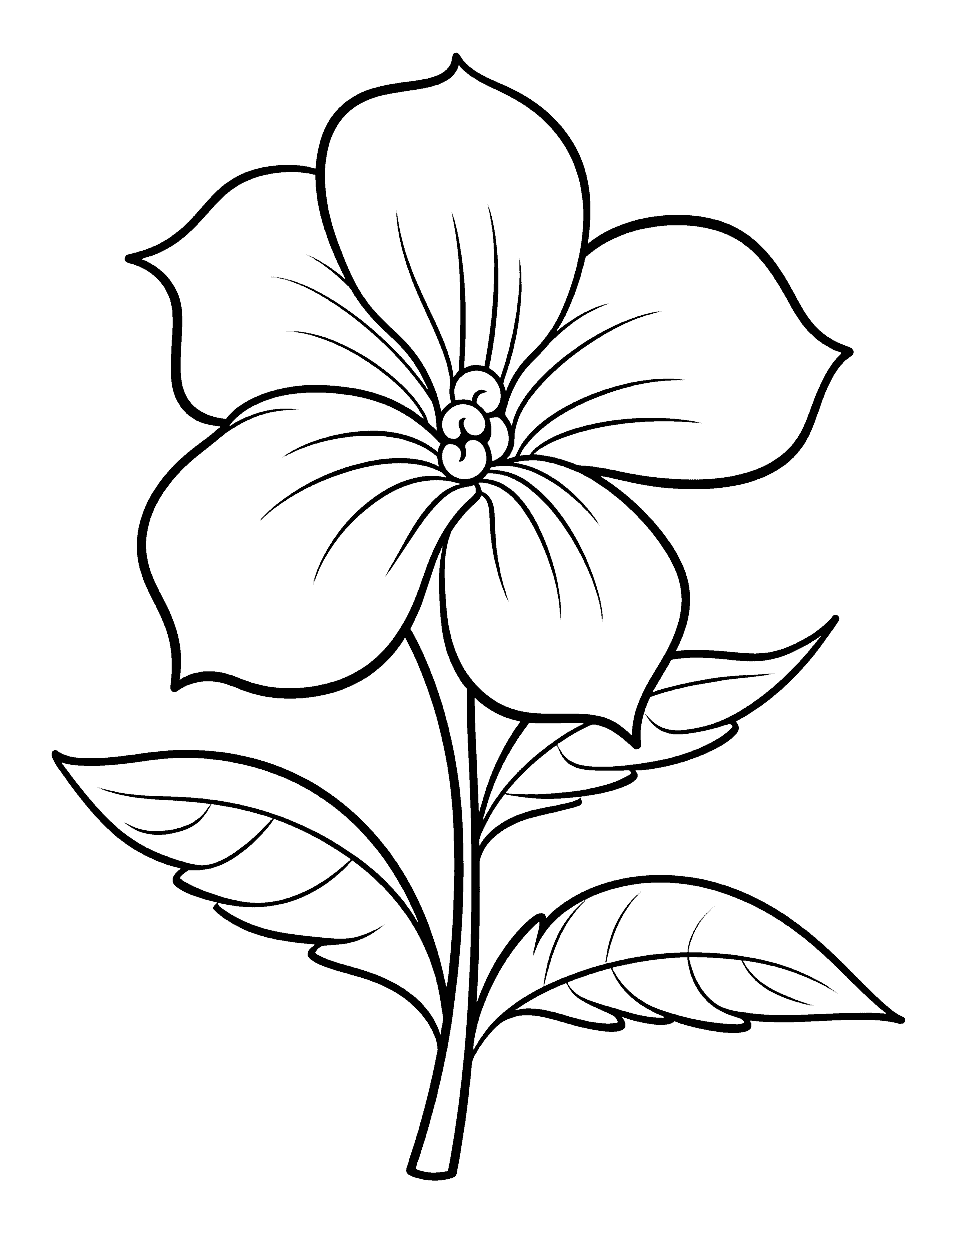 Tropical Flower for Preschool Coloring Page - A simple, large tropical flower design that is suitable for preschool kids.